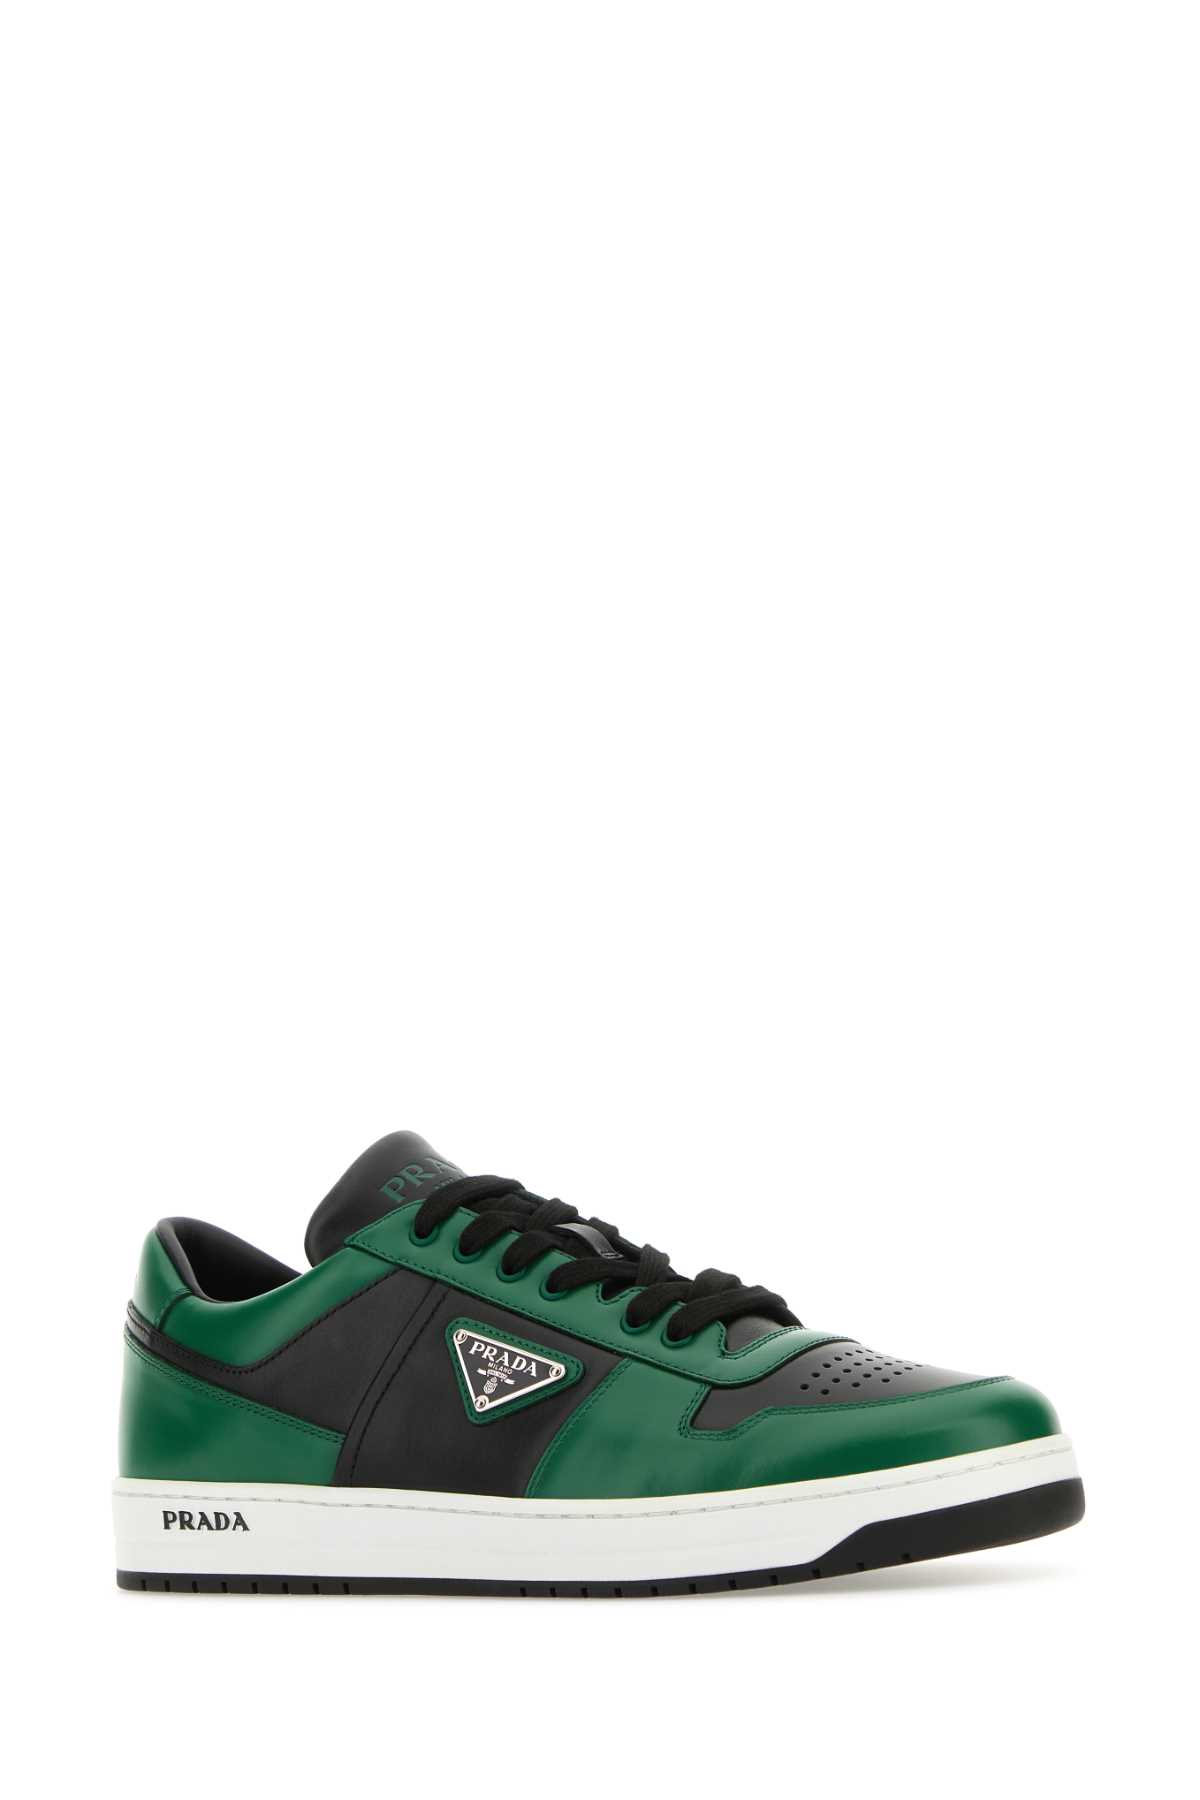 Prada Two-tone Leather Downtown Sneakers In Neroverde